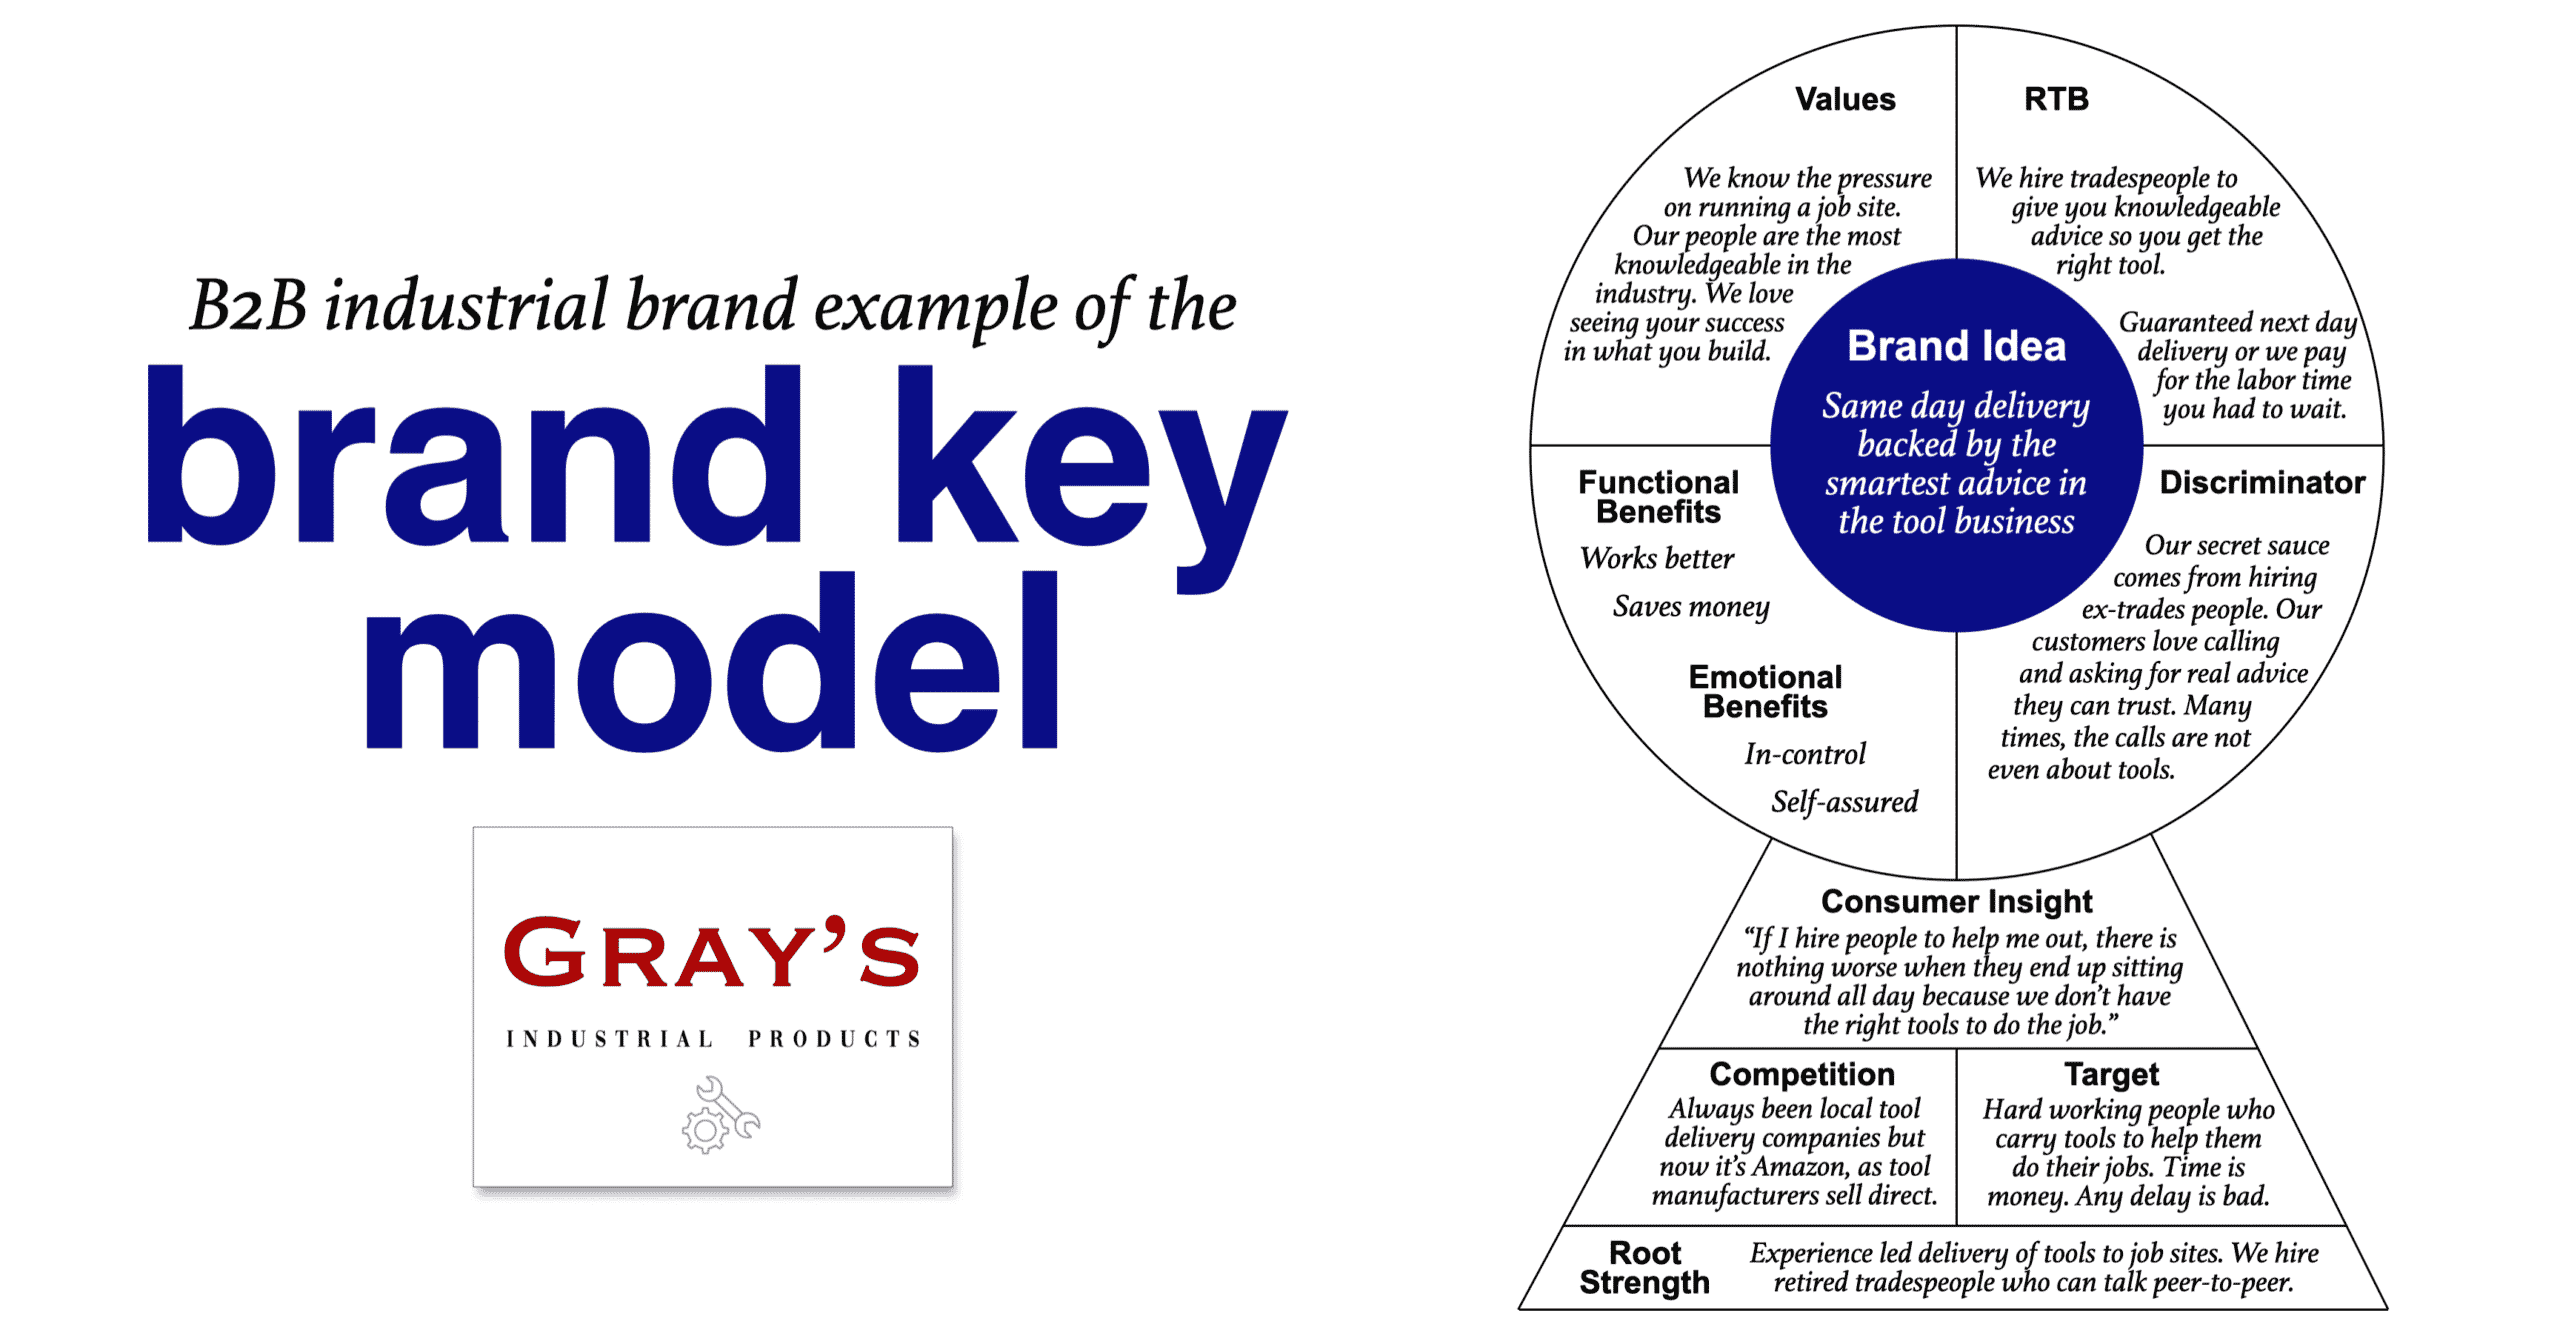 Brand Key Example for a B2B industrial brand to bring the unique selling proposition to life